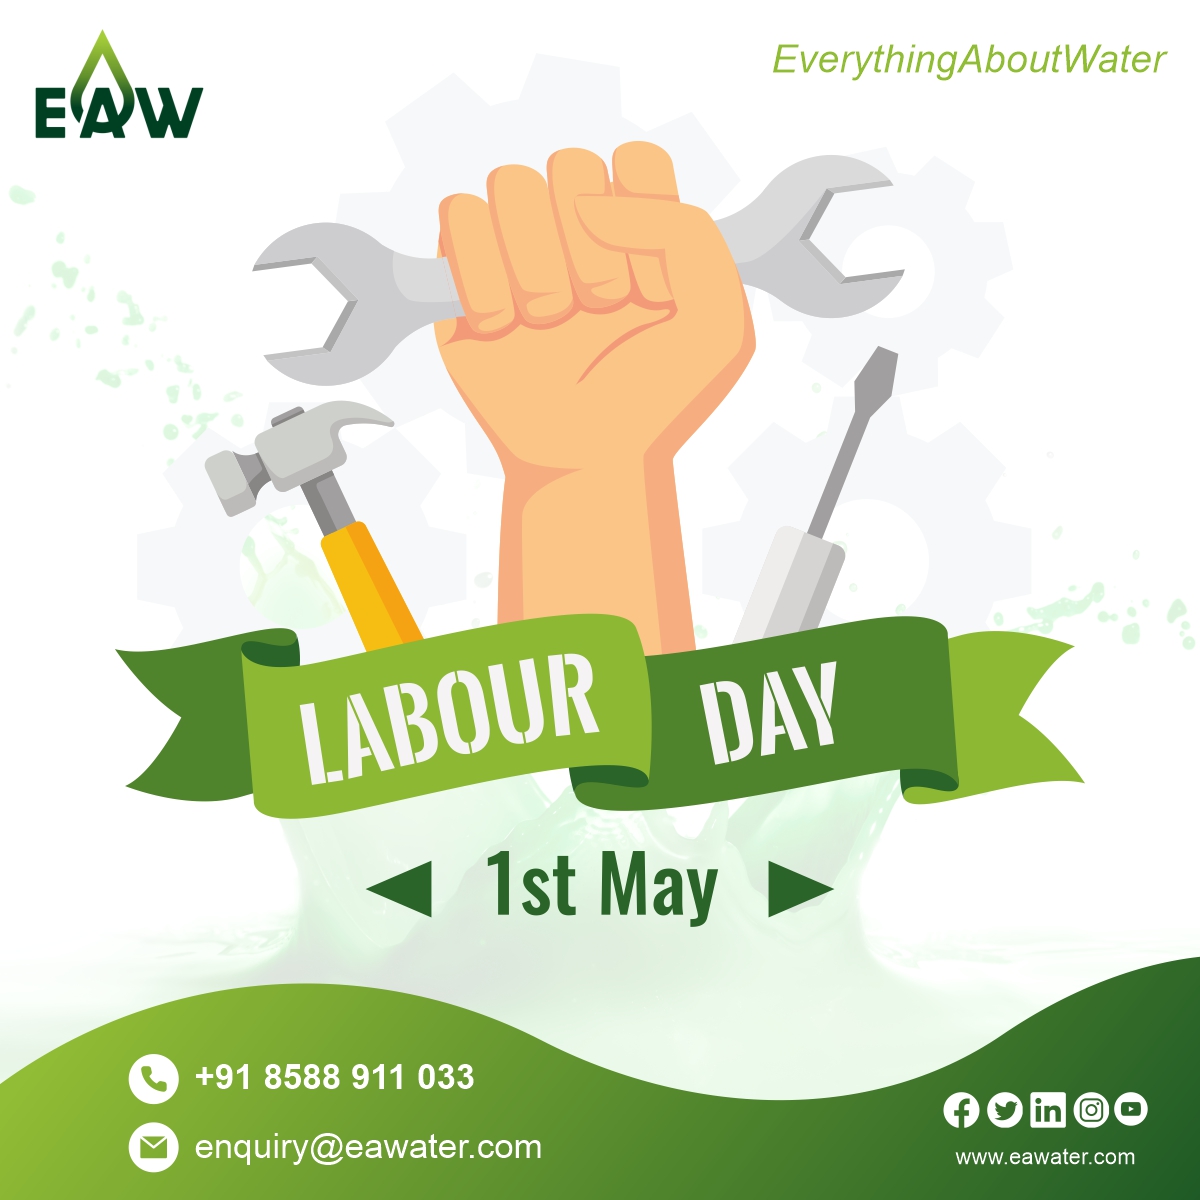 Happy Labour Day from EverythingAboutWater! Cheers to all the hardworking souls dedicated to preserving our planet's most precious resource. Keep making waves!

#LabourDay #WaterHeroes #EAWater #EAWMagazine